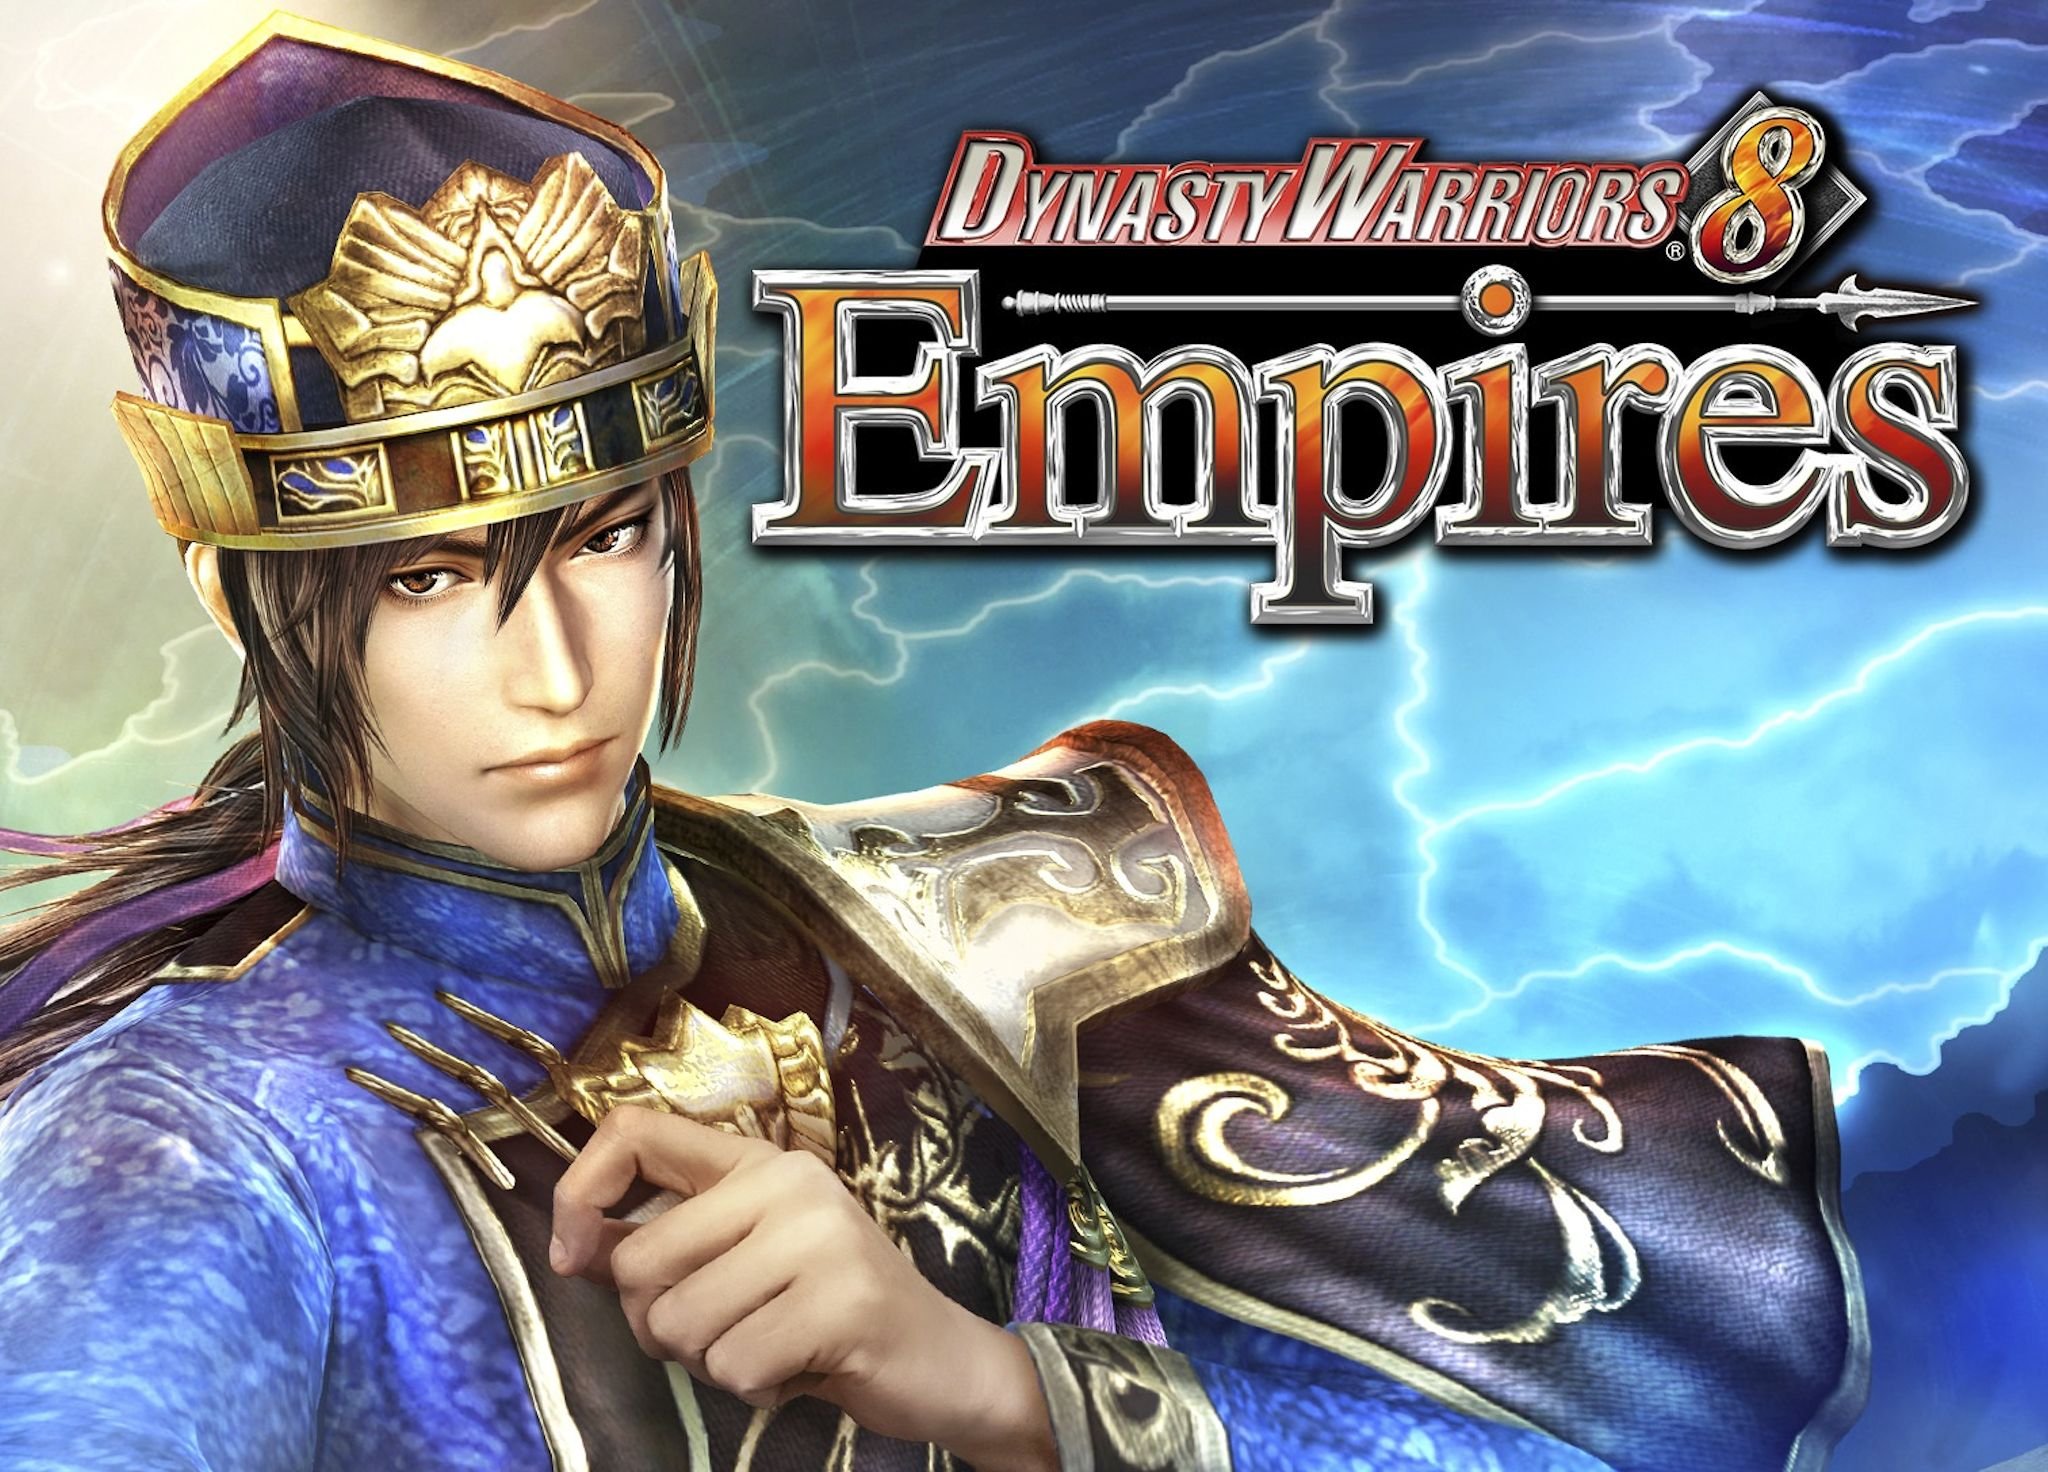 Download Game Dynasty Warriors 8 Empires PC